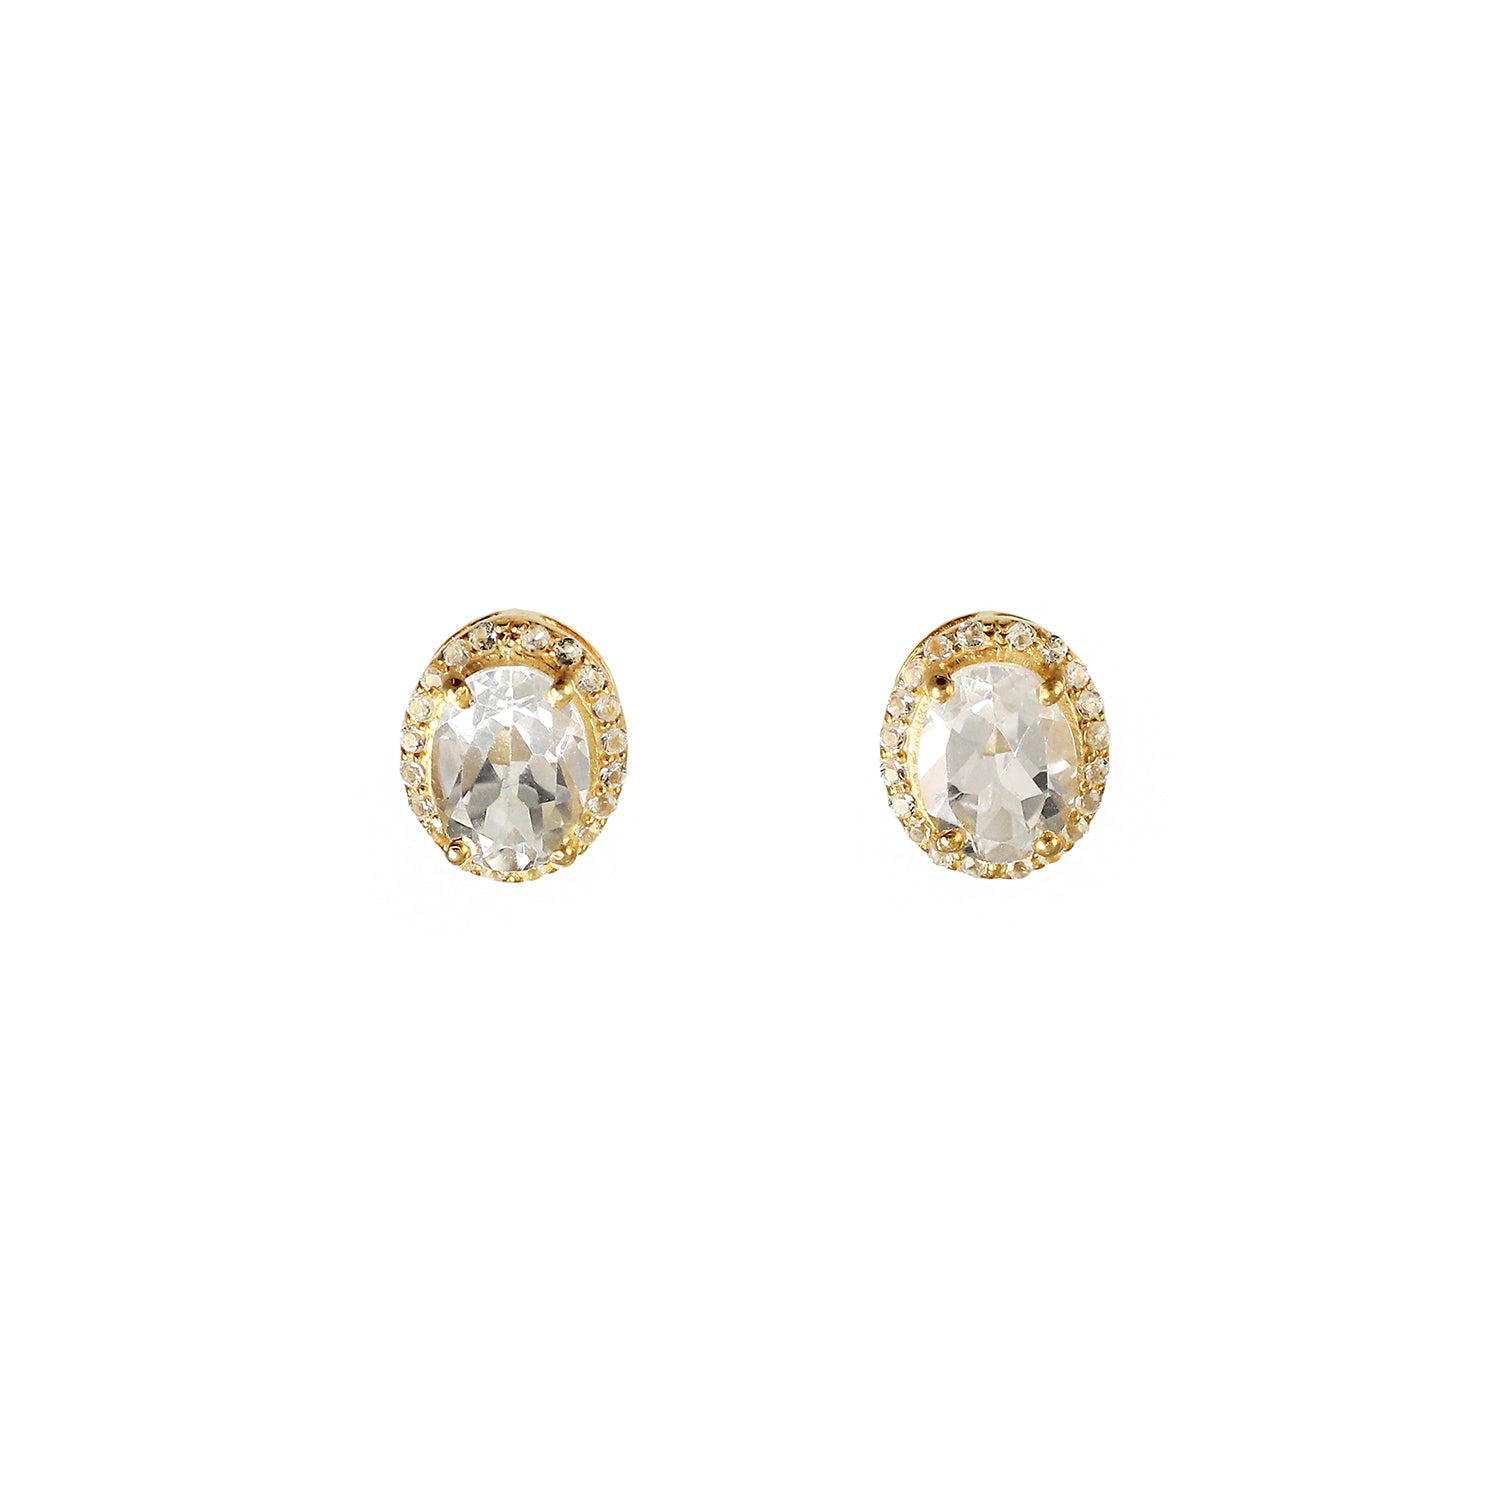 Sliver gold plated earrings studs with classic white topaz stones like diamonds